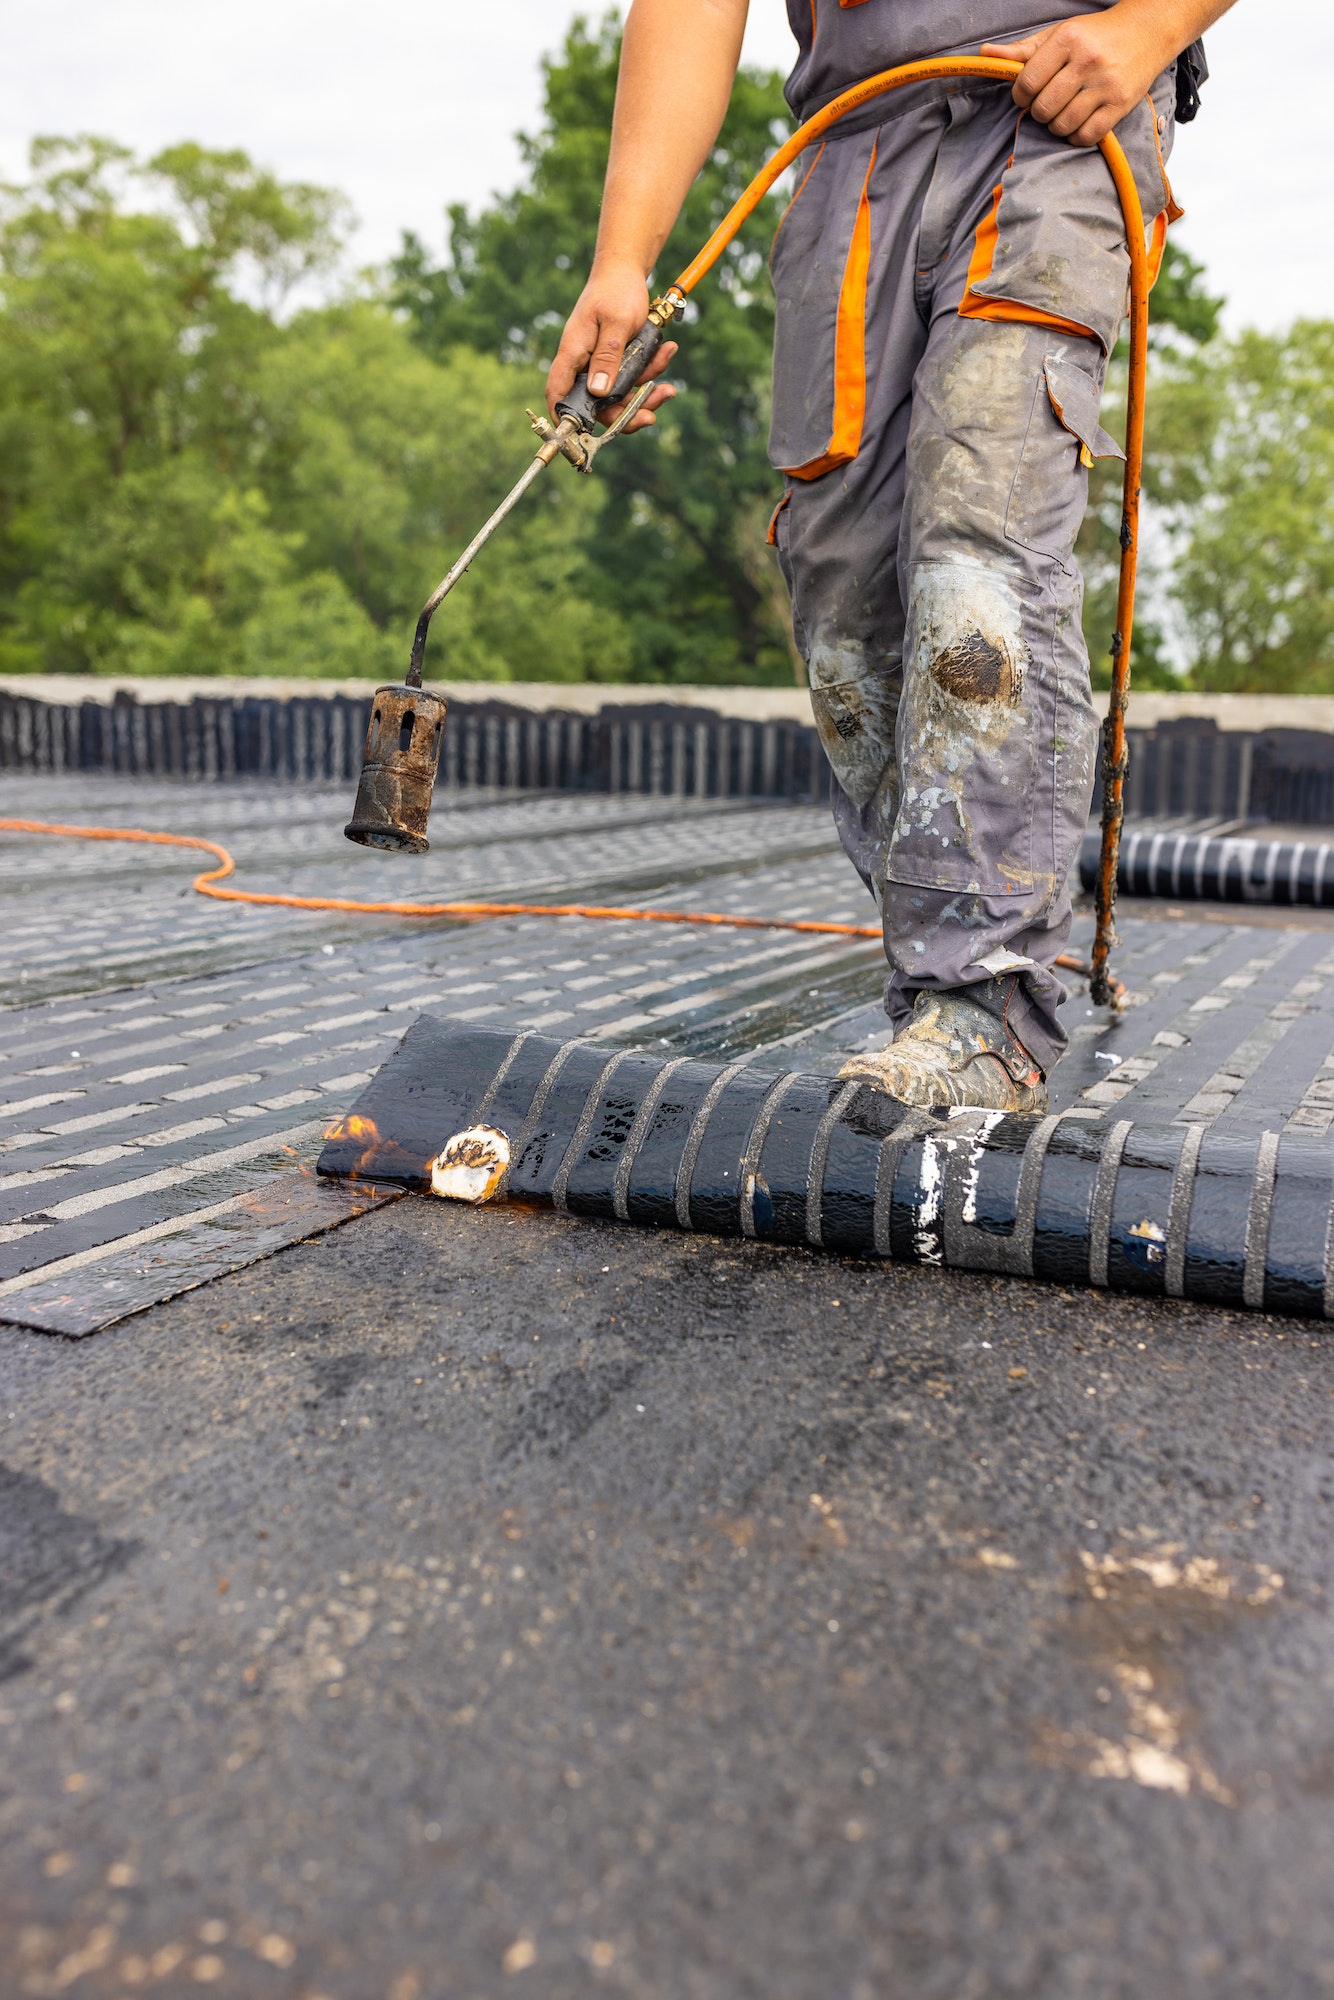 Workers placing a vapor barrier on the roof using a propane gas torch for welding bitumen sheets